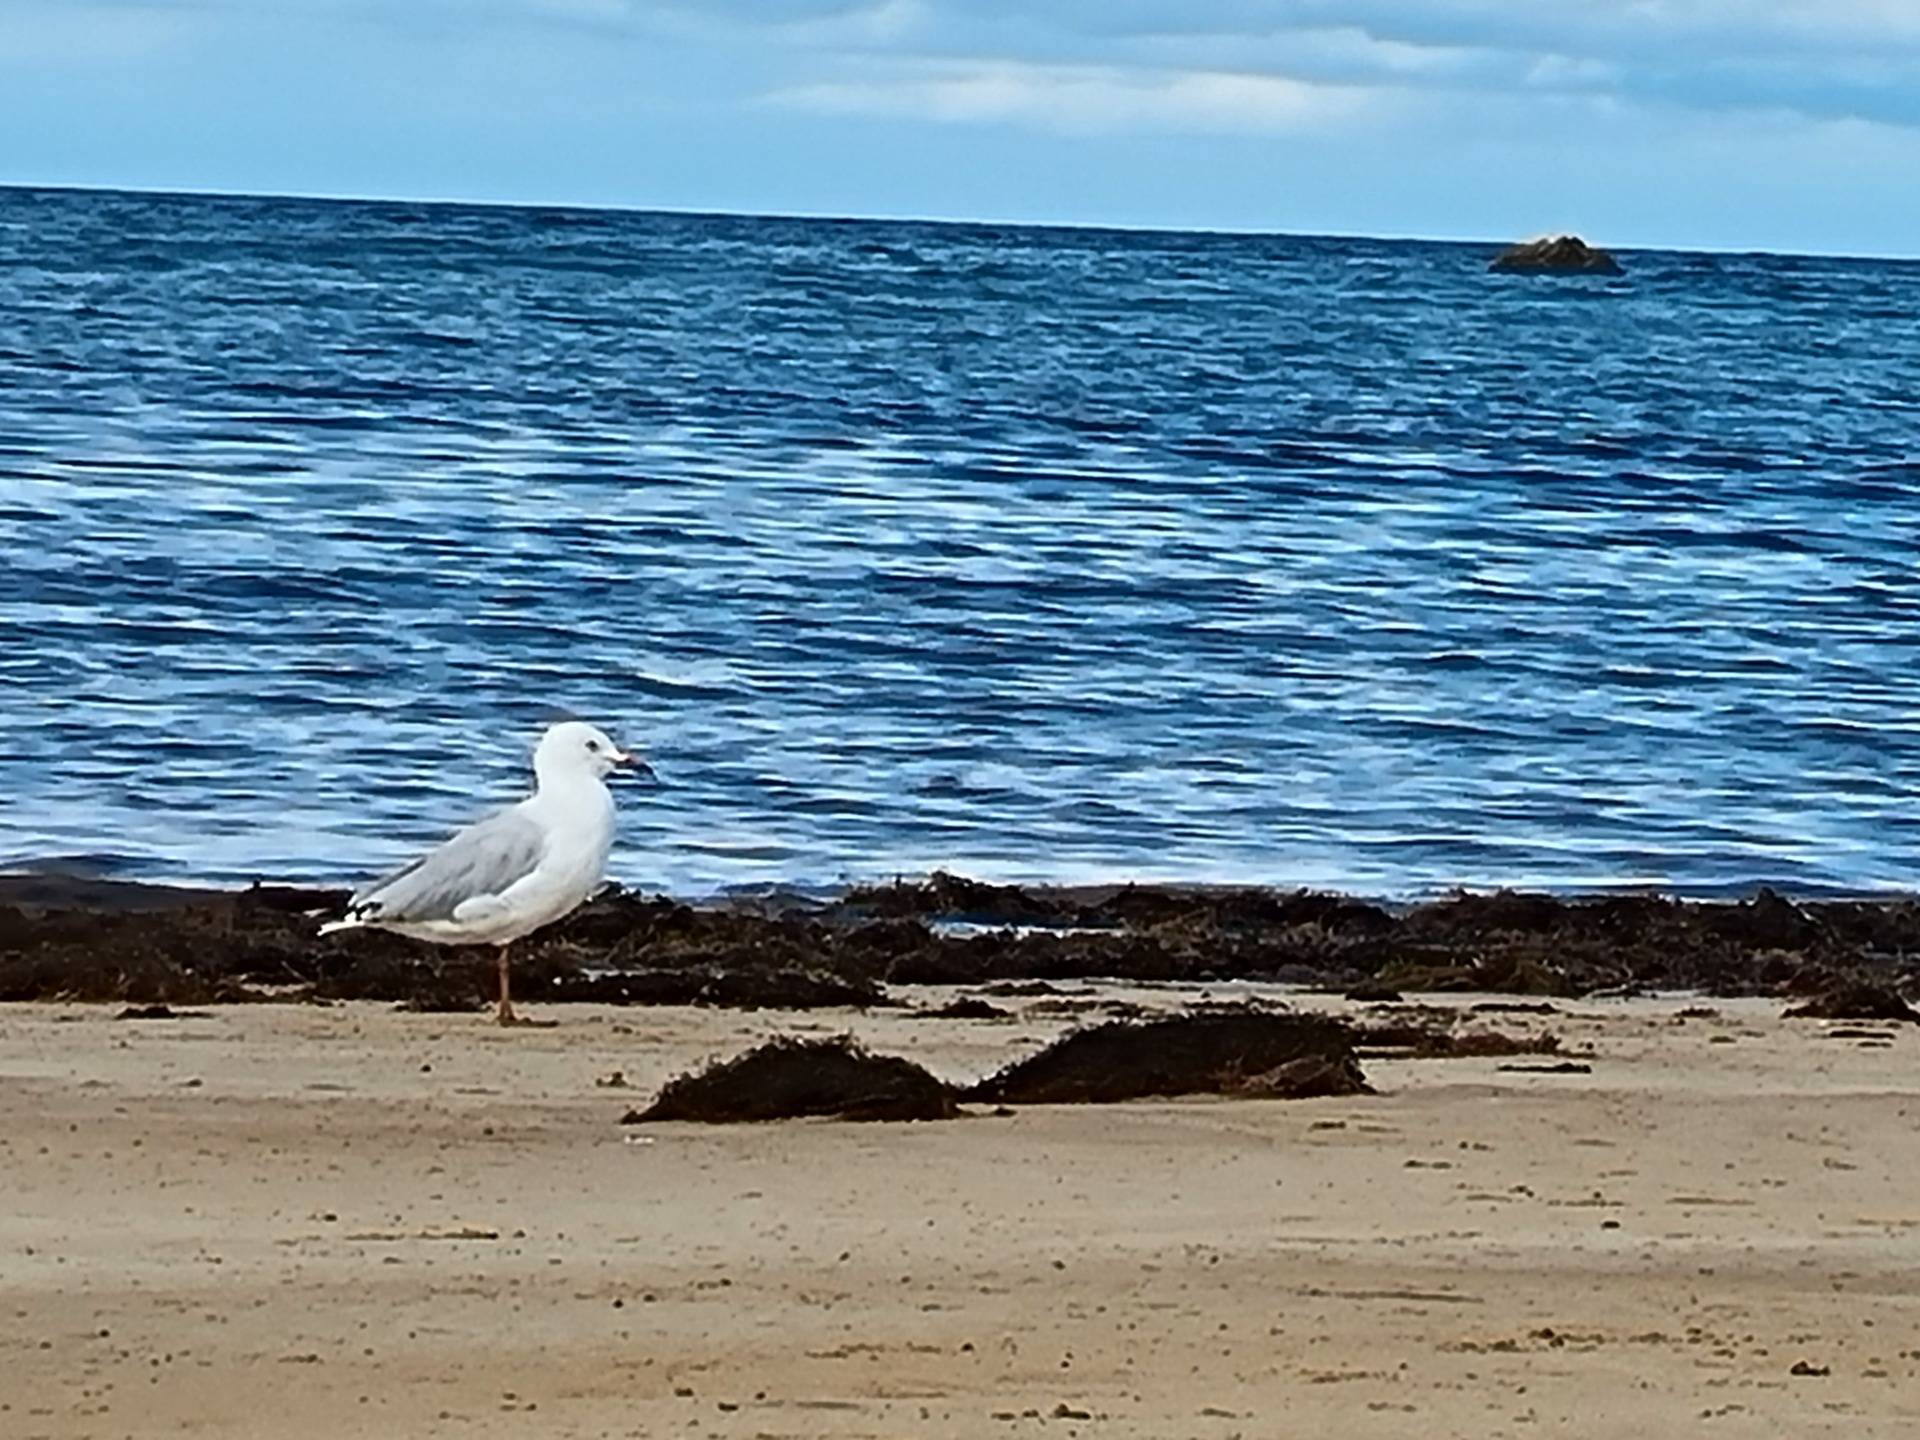 Every seaside town seems to have seagulls.